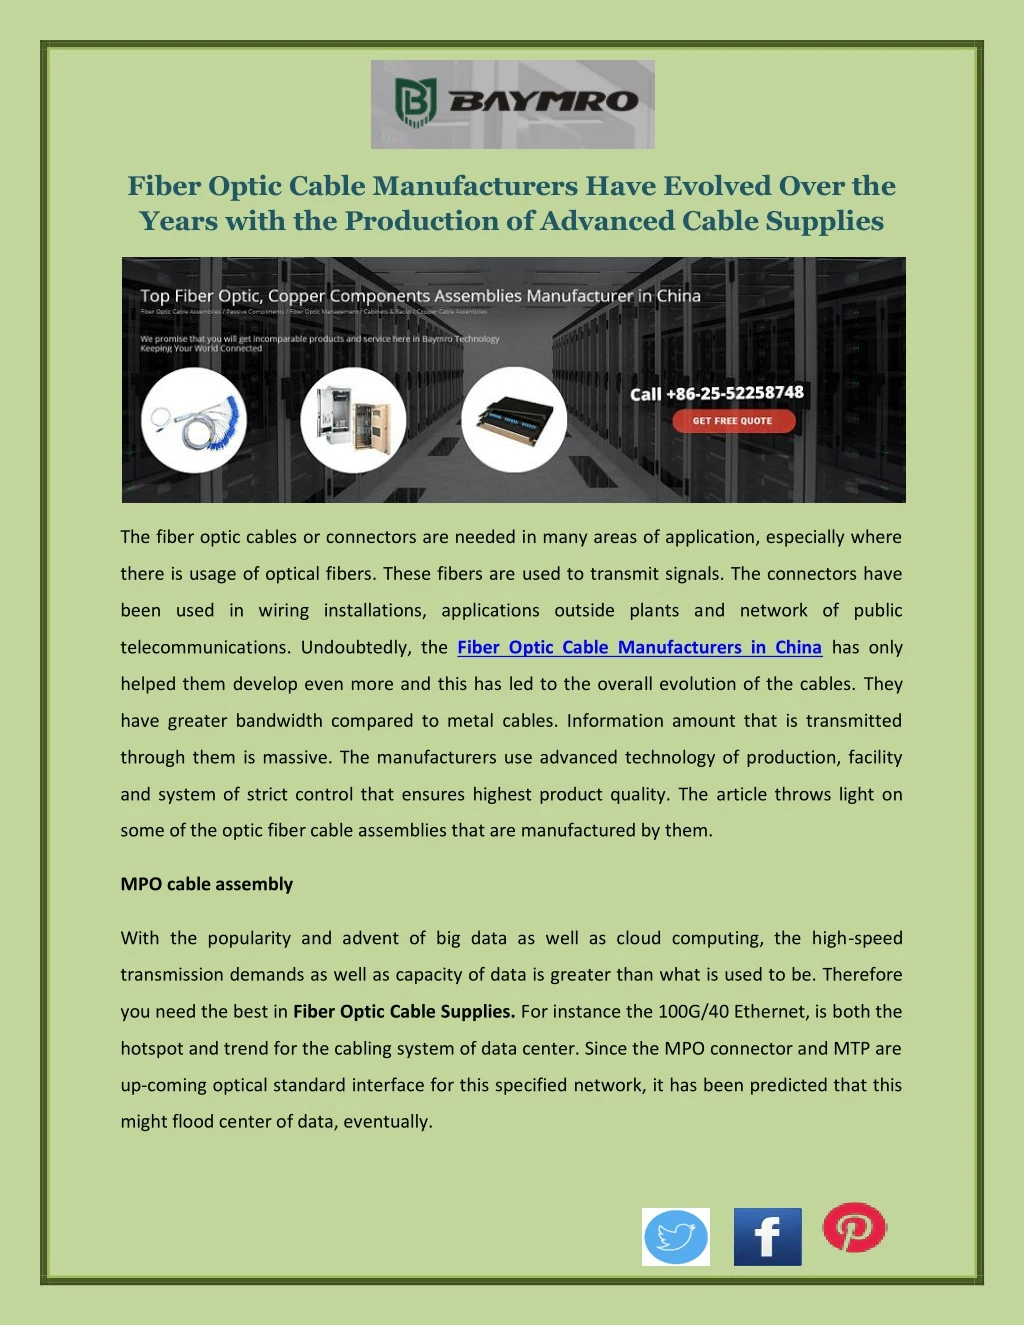 fiber optic cable manufacturers have evolved over